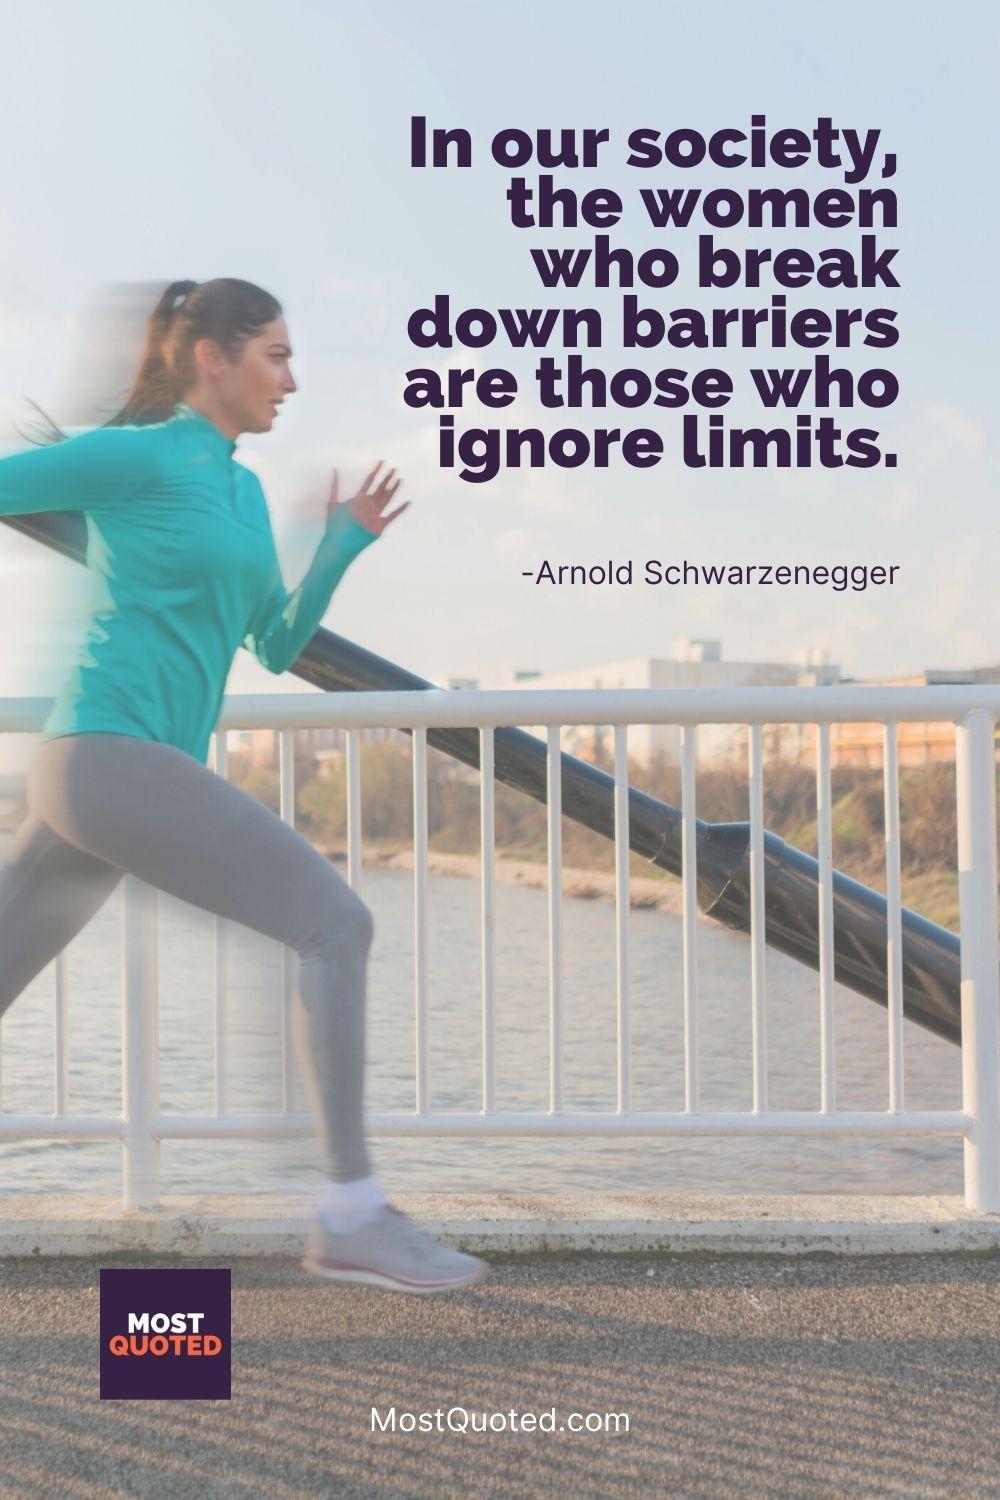 In our society, the women who break down barriers are those who ignore limits. - Arnold Schwarzenegger